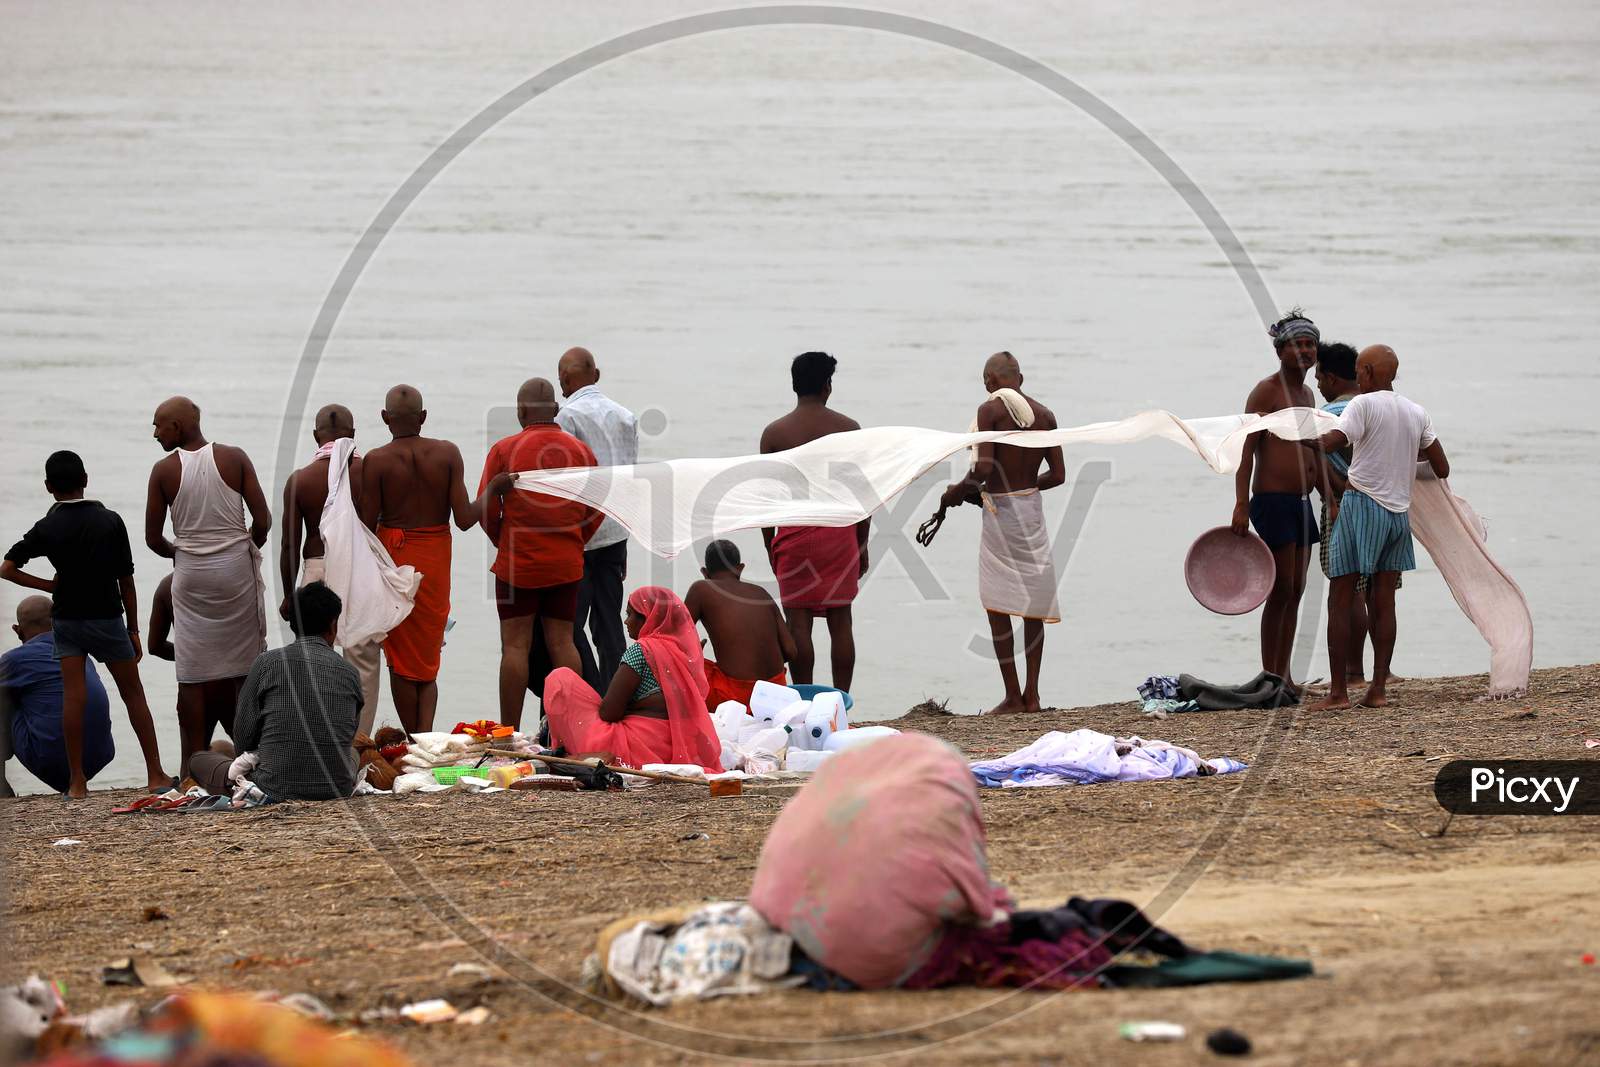 Hindu Devotees Dry Their Clothes After Taking Holy Dip In River Ganga In Prayagraj, June 14, 2020.